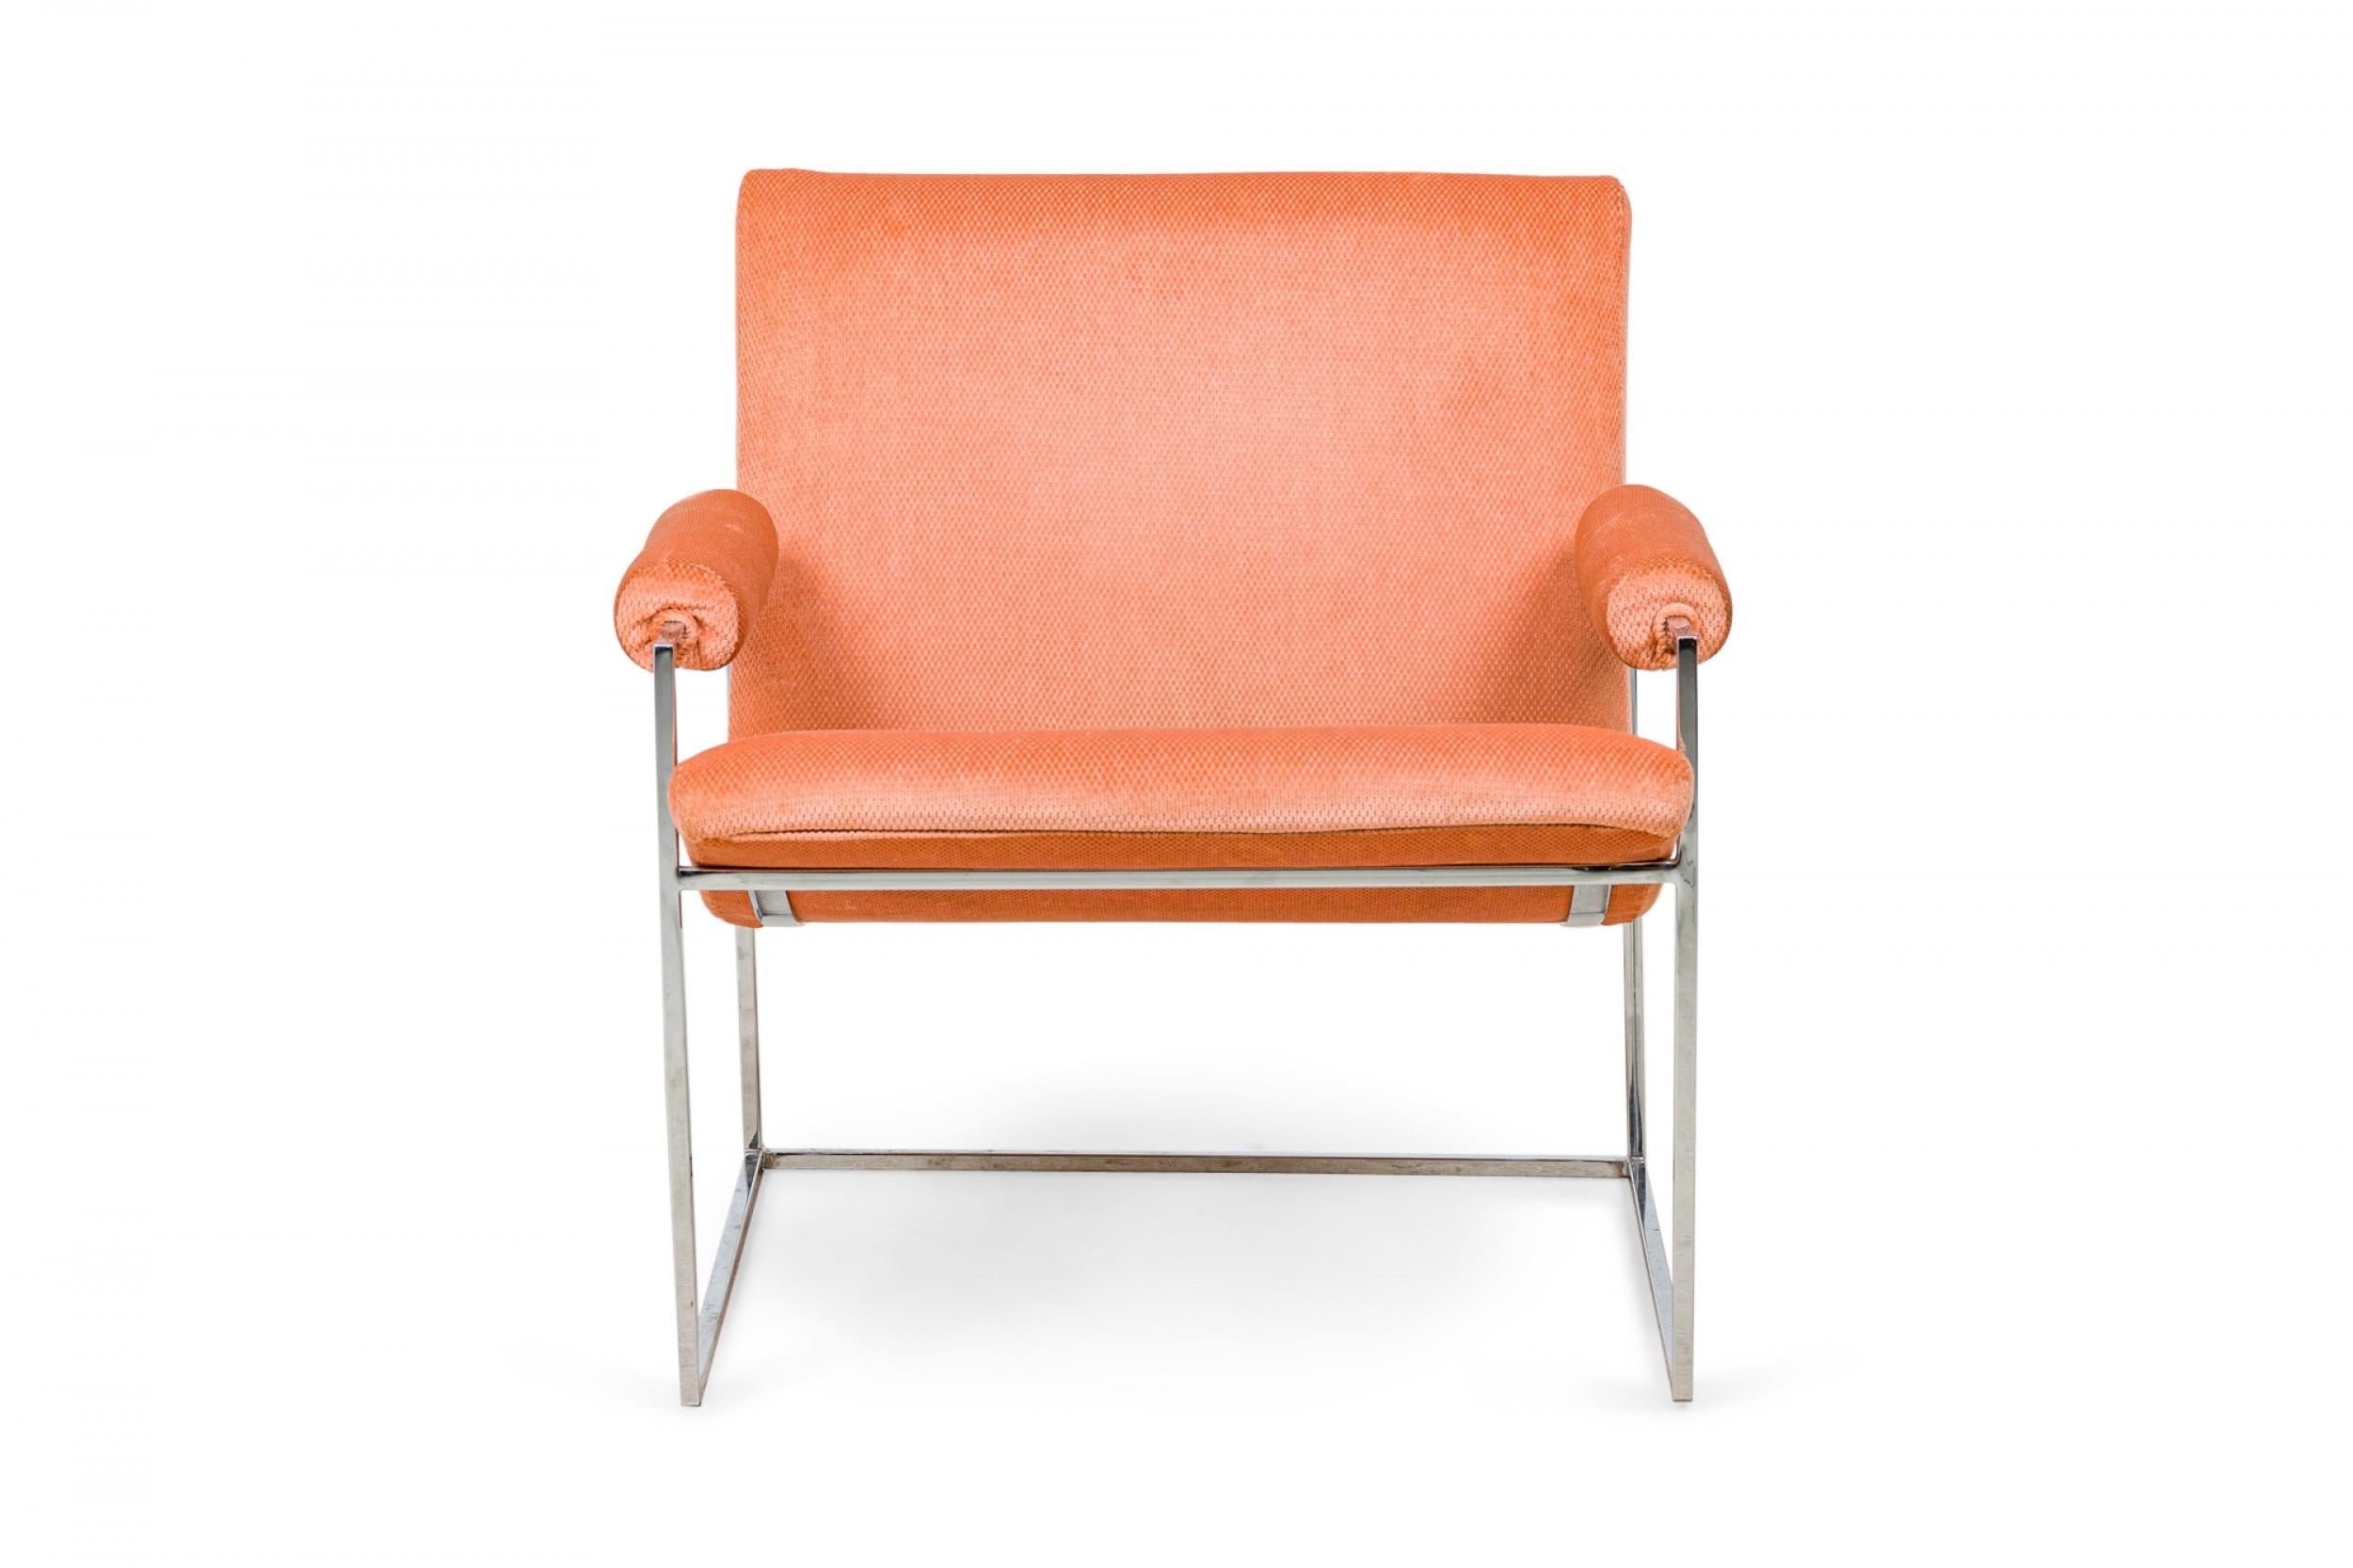 American Mid-Century scoop armchair with light pink coral textured velour upholstered seat, back, and arms with button tufted detail along the seam where the seat and back join, supported by a thin square tube chrome frame and legs. (MILO BAUGHMAN